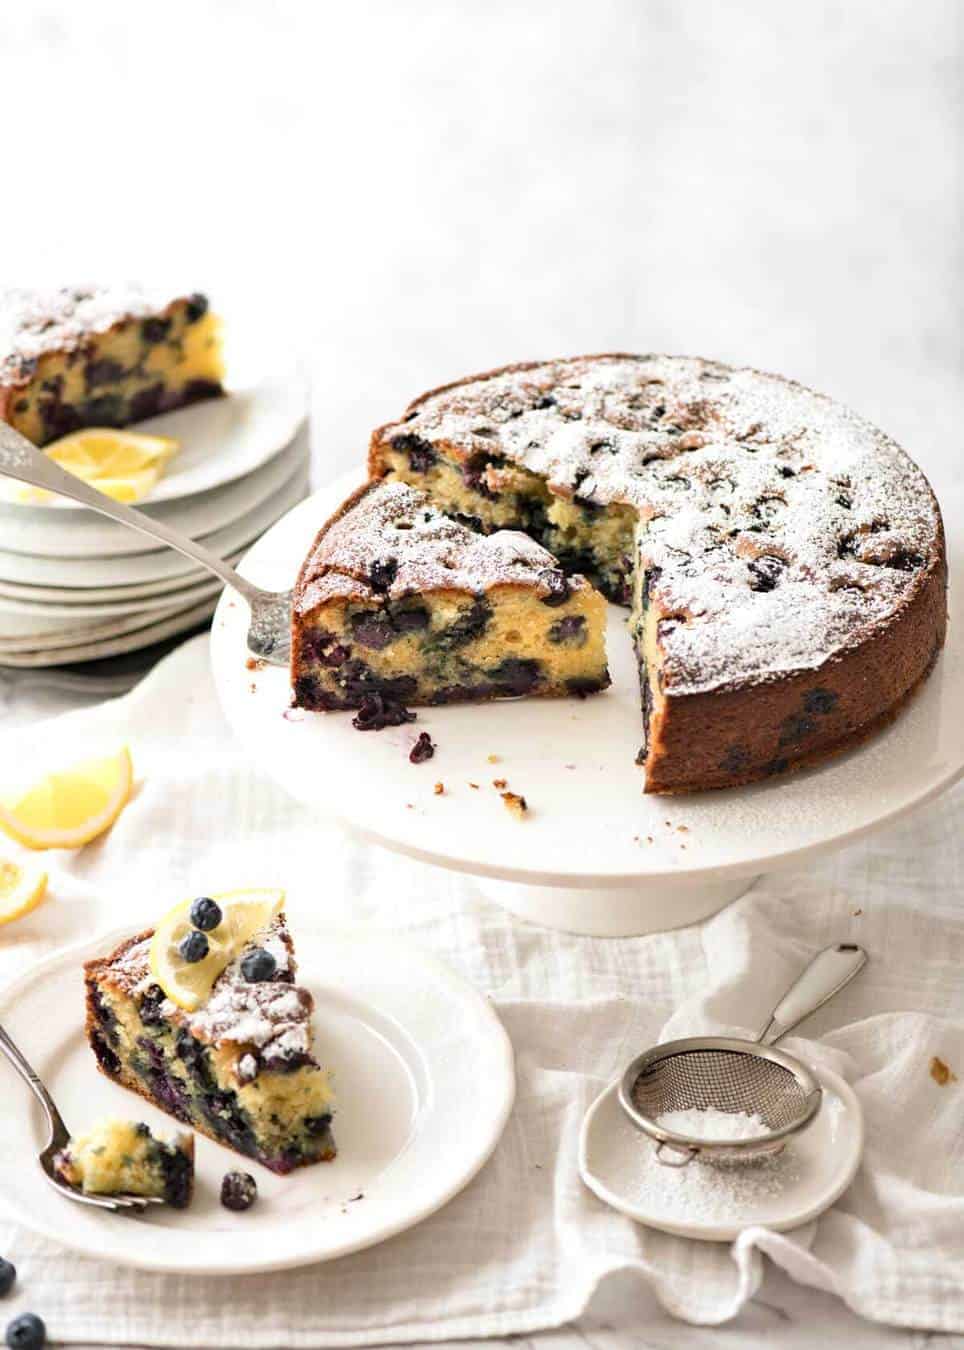 A lovely Blueberry Lemon Yoghurt Cake that's incredibly moist and astonishingly quick to make. www.recipetineats.com